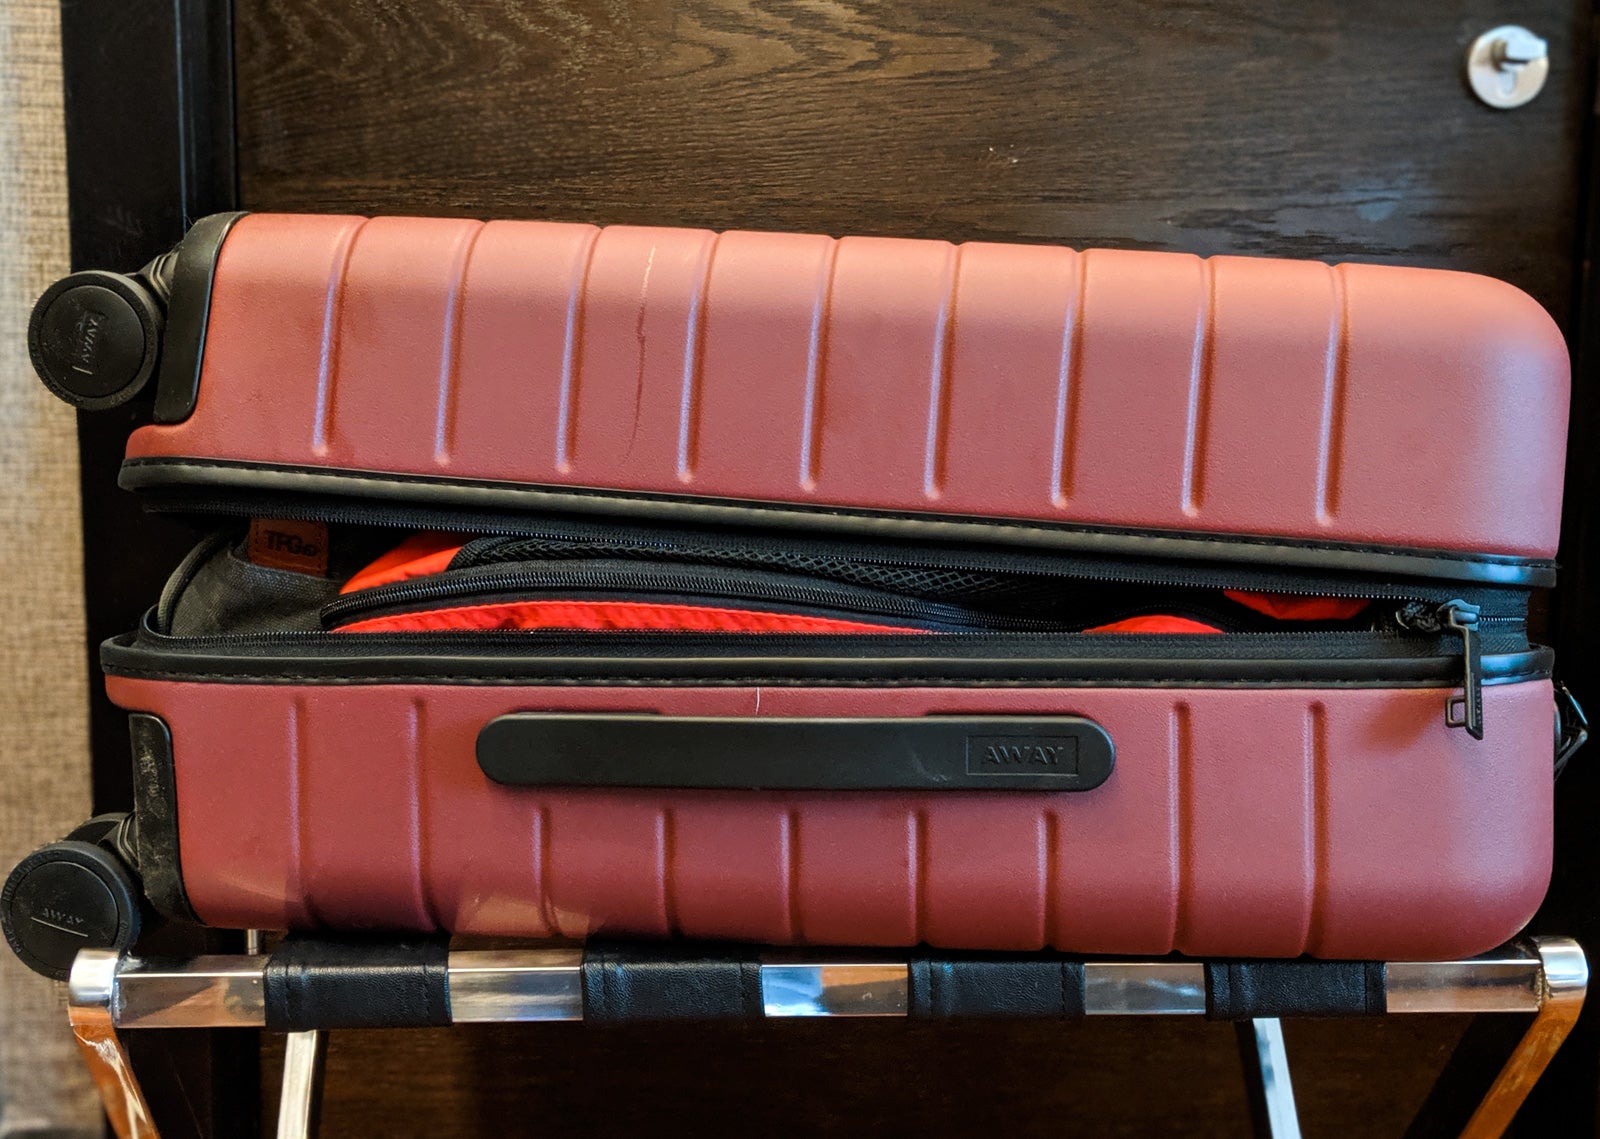 RIMOWA has the spirit of summer stowed away inside its luggage